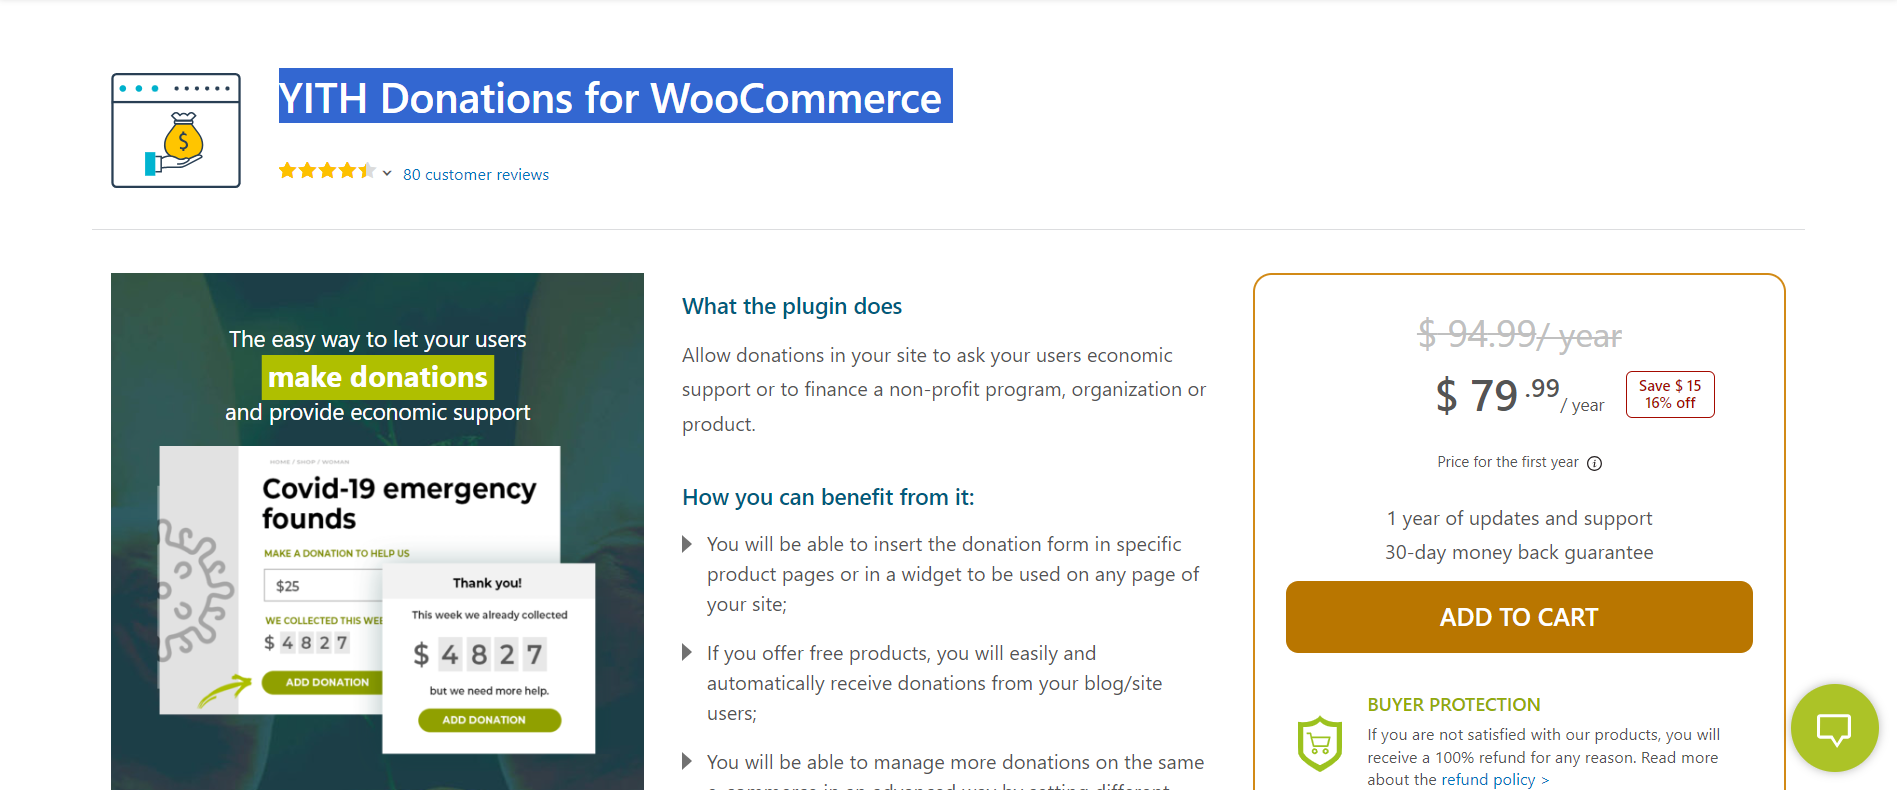 YITH Donation for WooCommerce